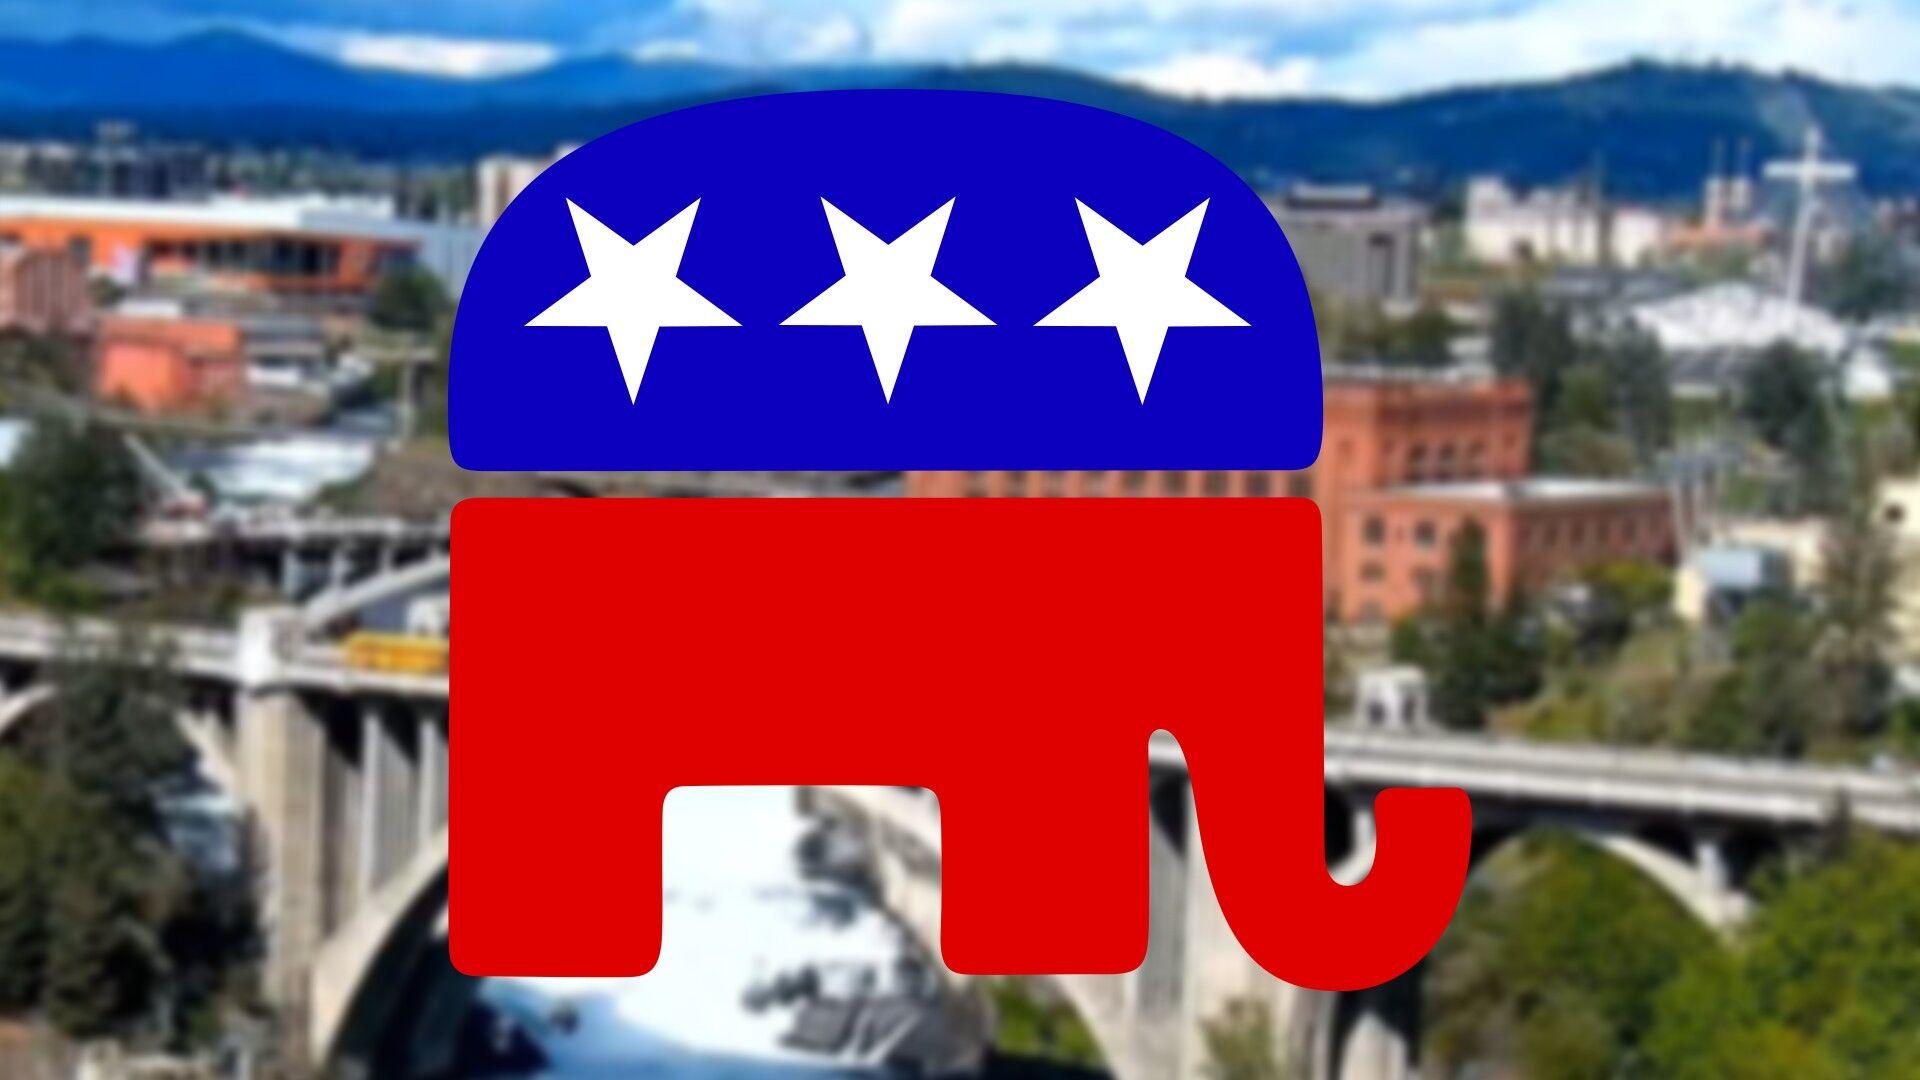 Several Republicans are leaving elected offices in eastern Washington, making room for new conservatives [Video]